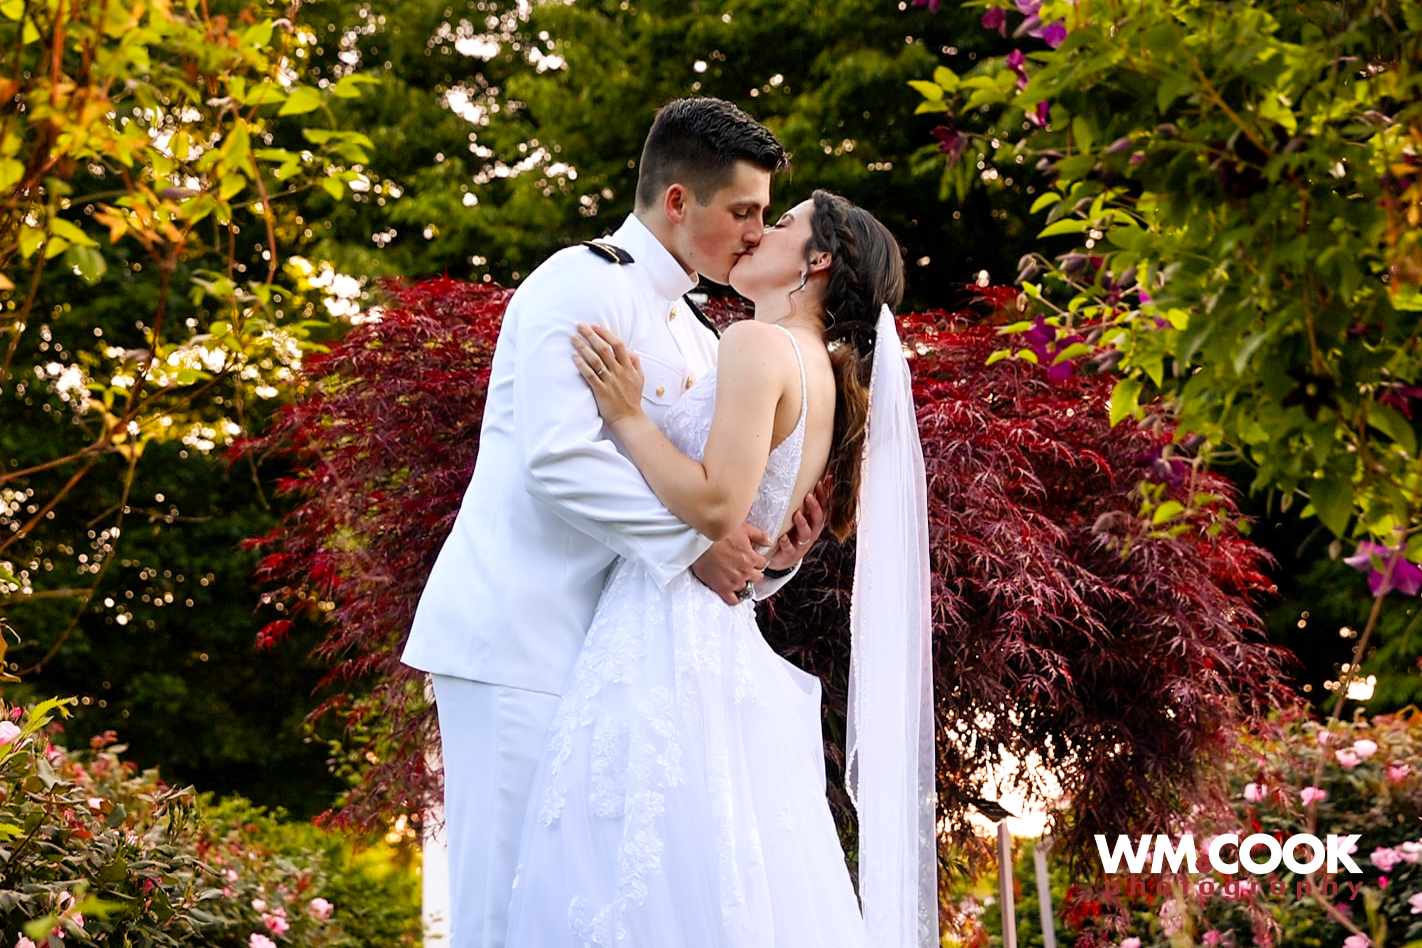 A Breathtaking Bel Air Wedding at Rockfield Manor: Jane and Zach’s Unforgettable Day